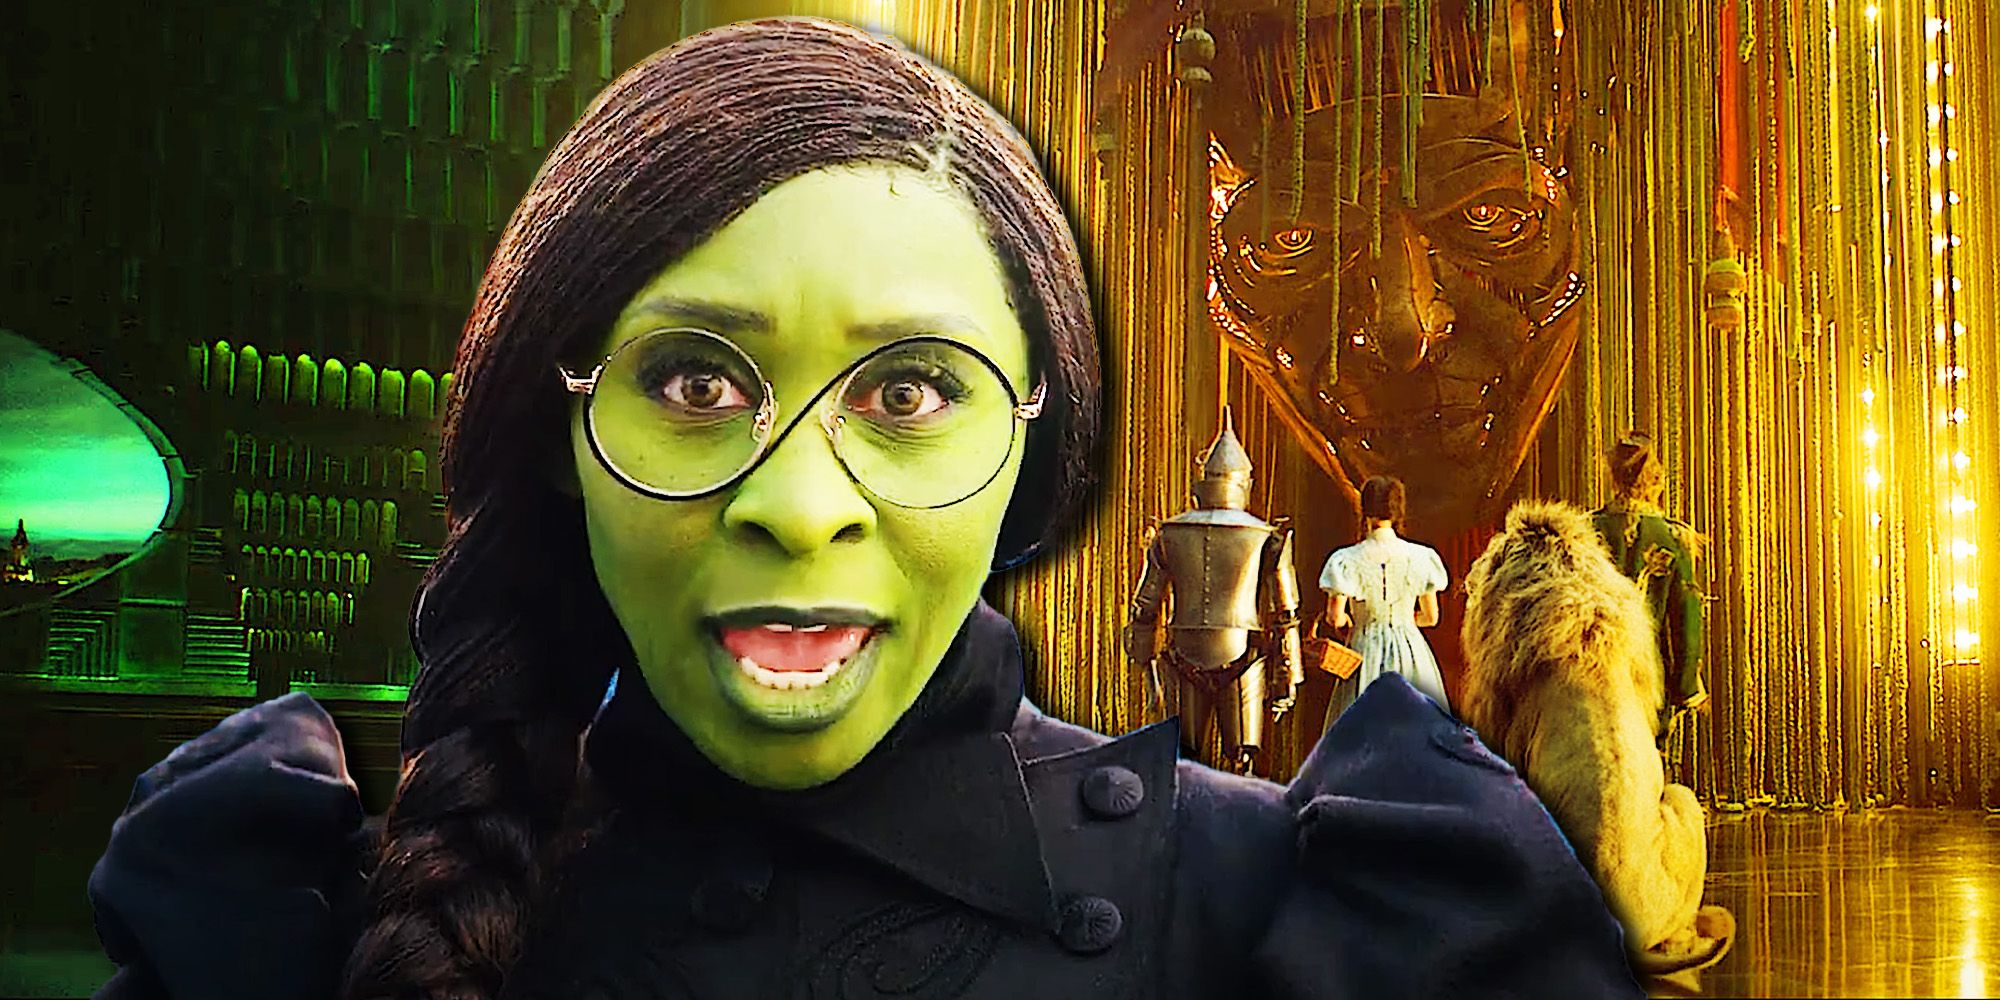 The Wicked Movie's Trailer Is Divisive For One Big Reason